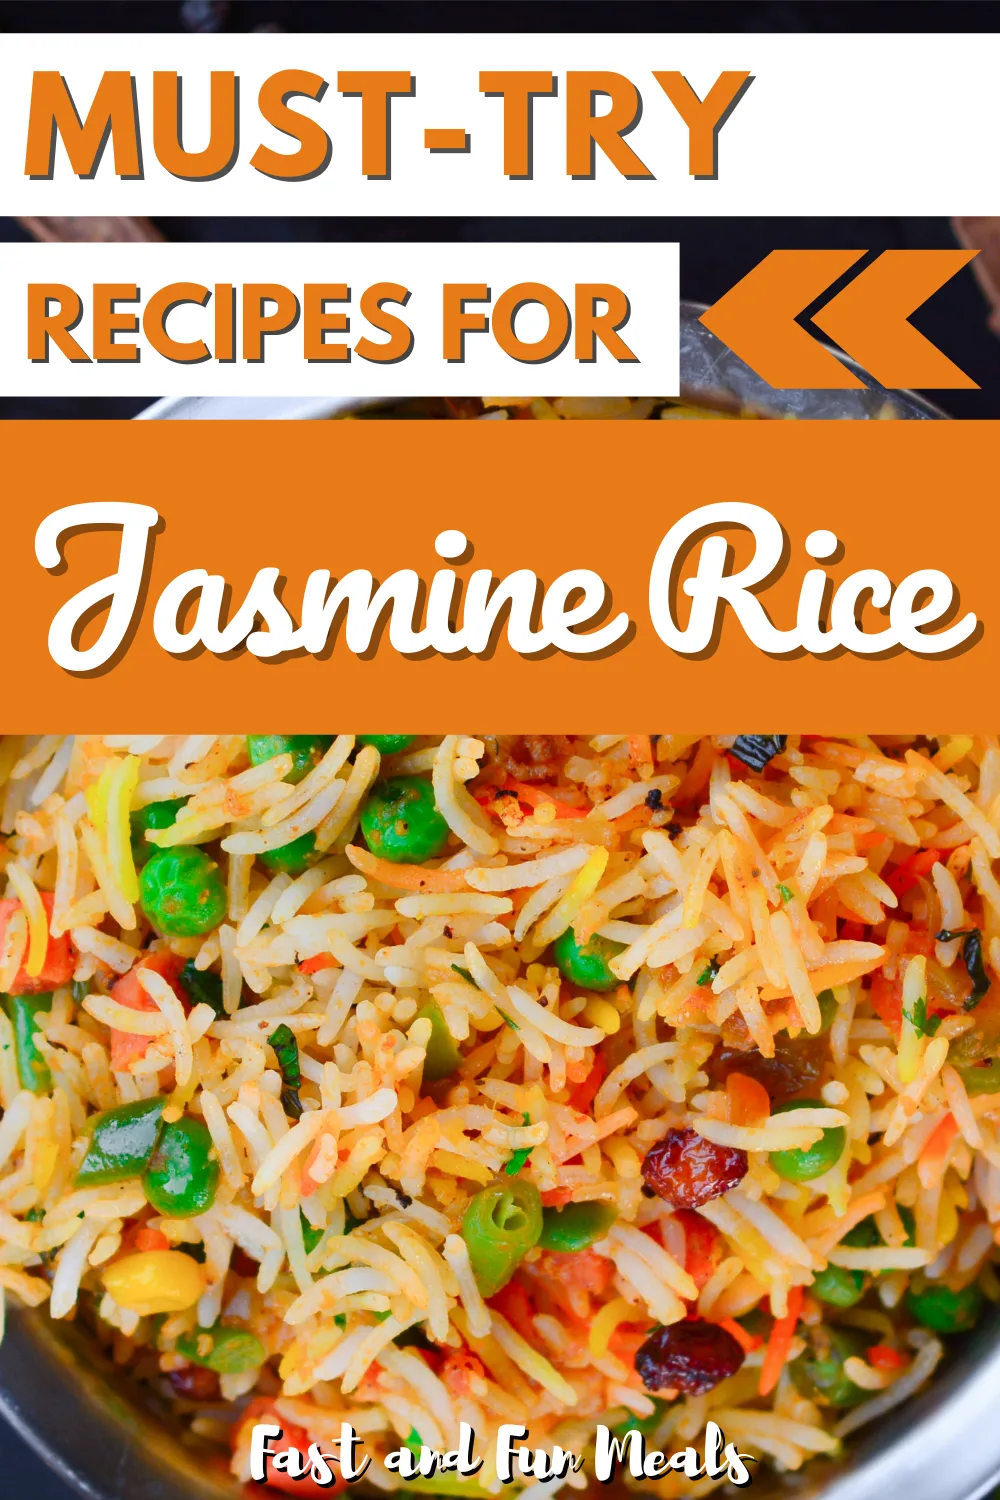 https://fastandfunmeals.com/wp-content/uploads/2022/02/Easy-Recipes-with-Jasmine-Rice-Pin.png.webp